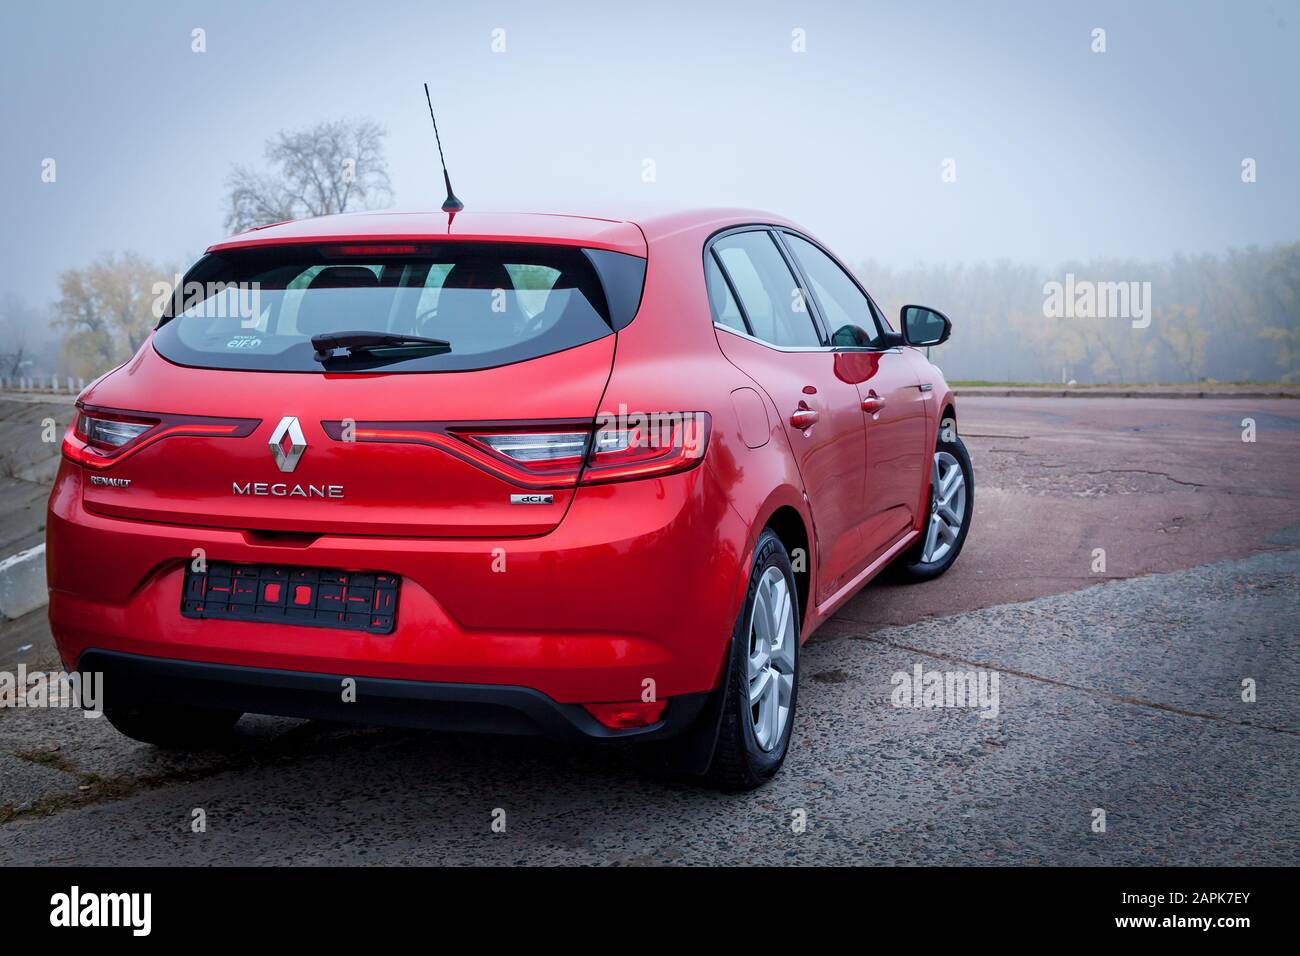 Kiev September 24, 2019: A new car Renault Megane Sedan red color is parked in the autumn park with many fallen leaves Stock Photo - Alamy